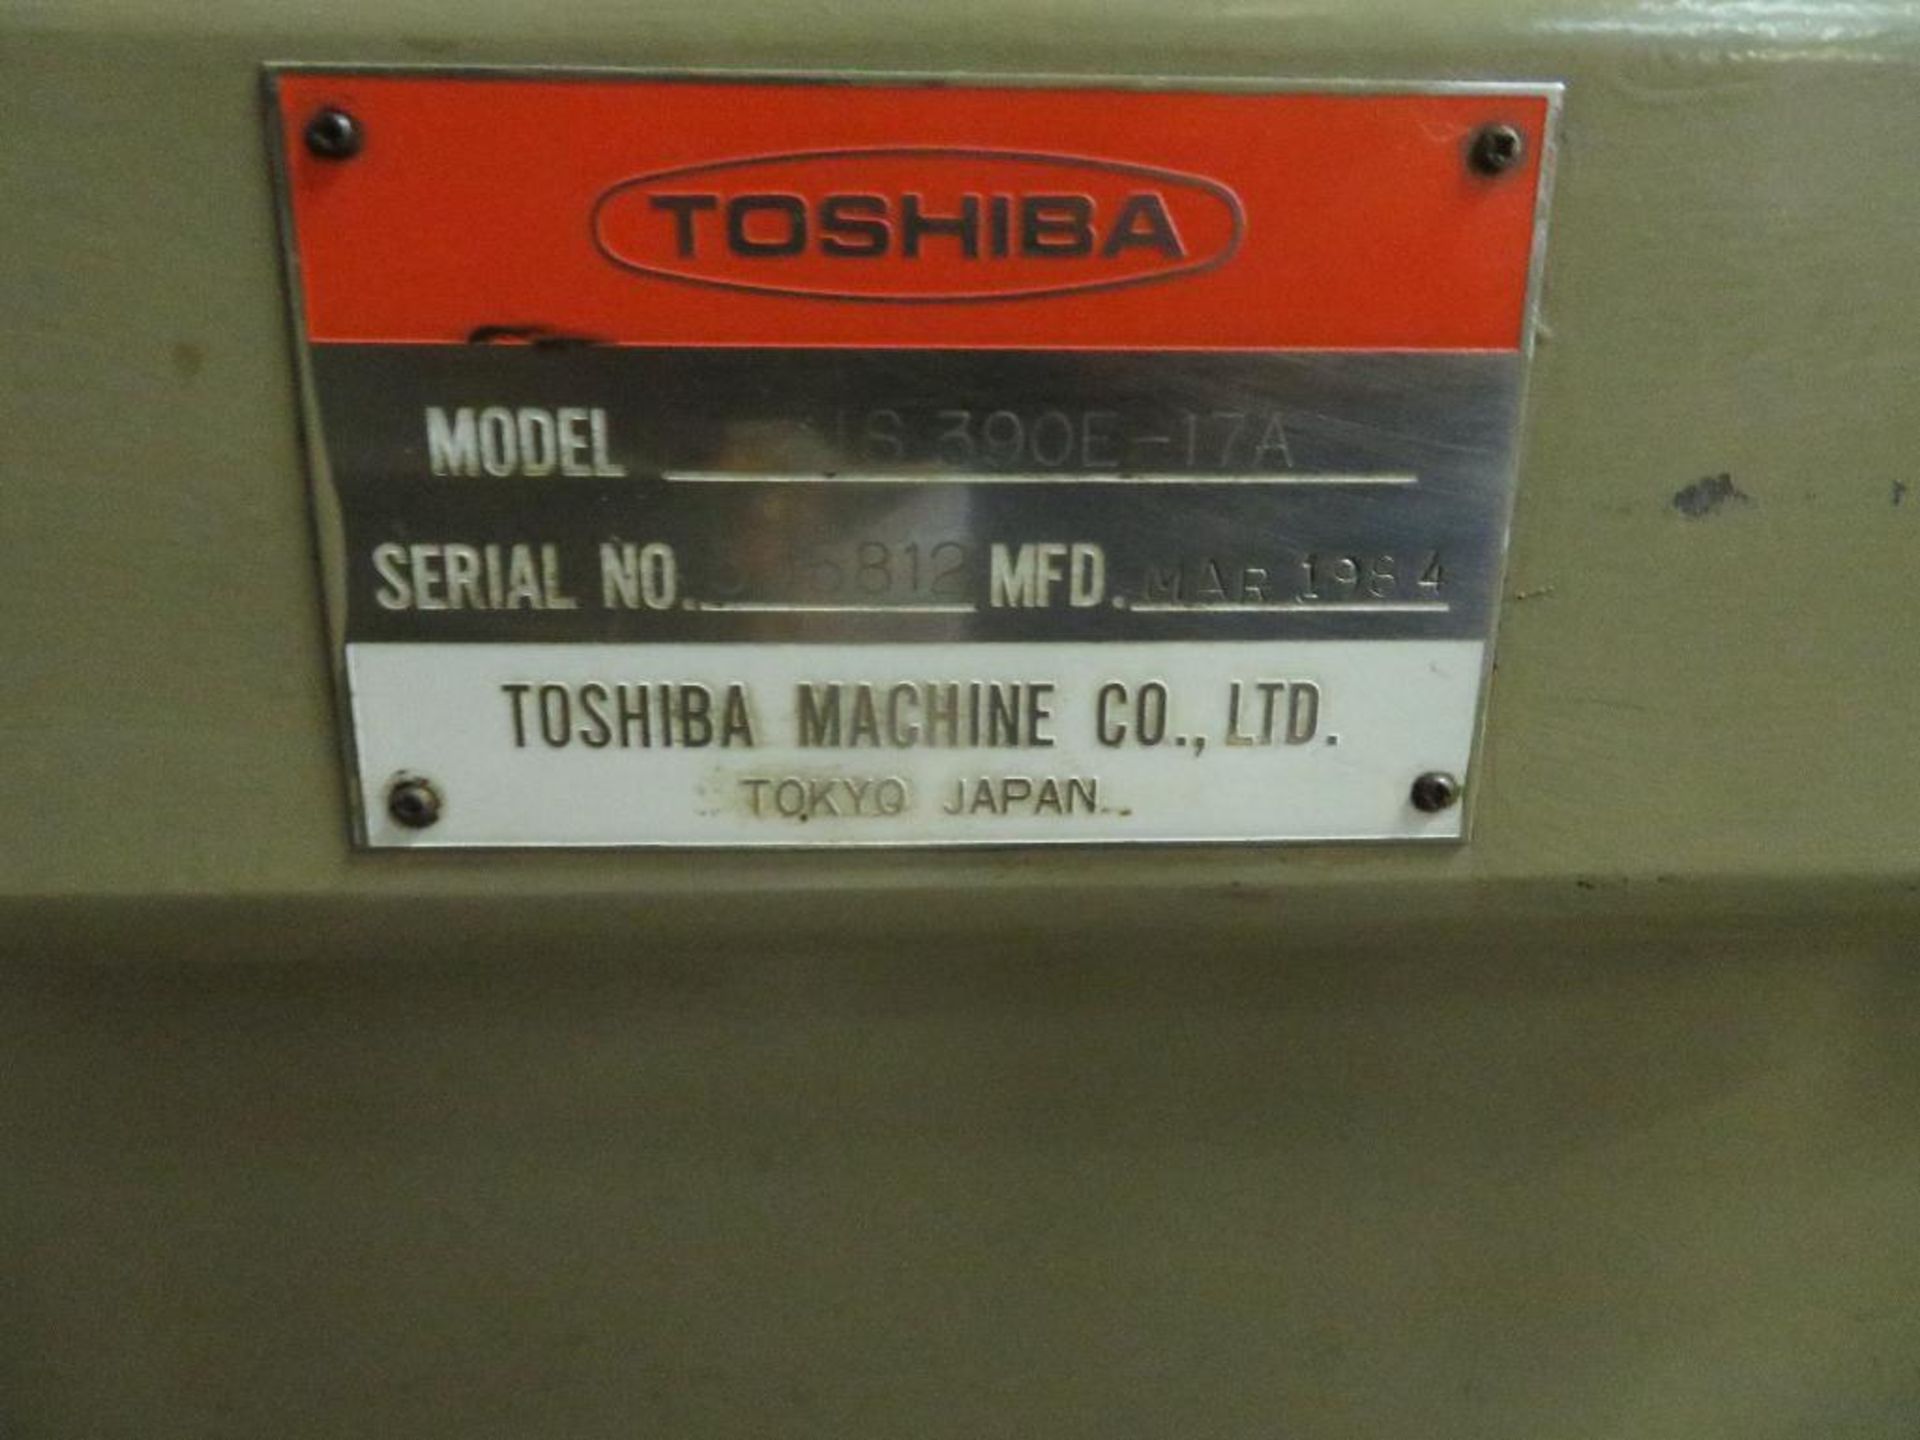 Toshiba 390 Ton, 30.3 oz. Hydraulic Injection Molding Machine Model IS390E-17A, S/N 305812 (1984), 2 - Image 5 of 5